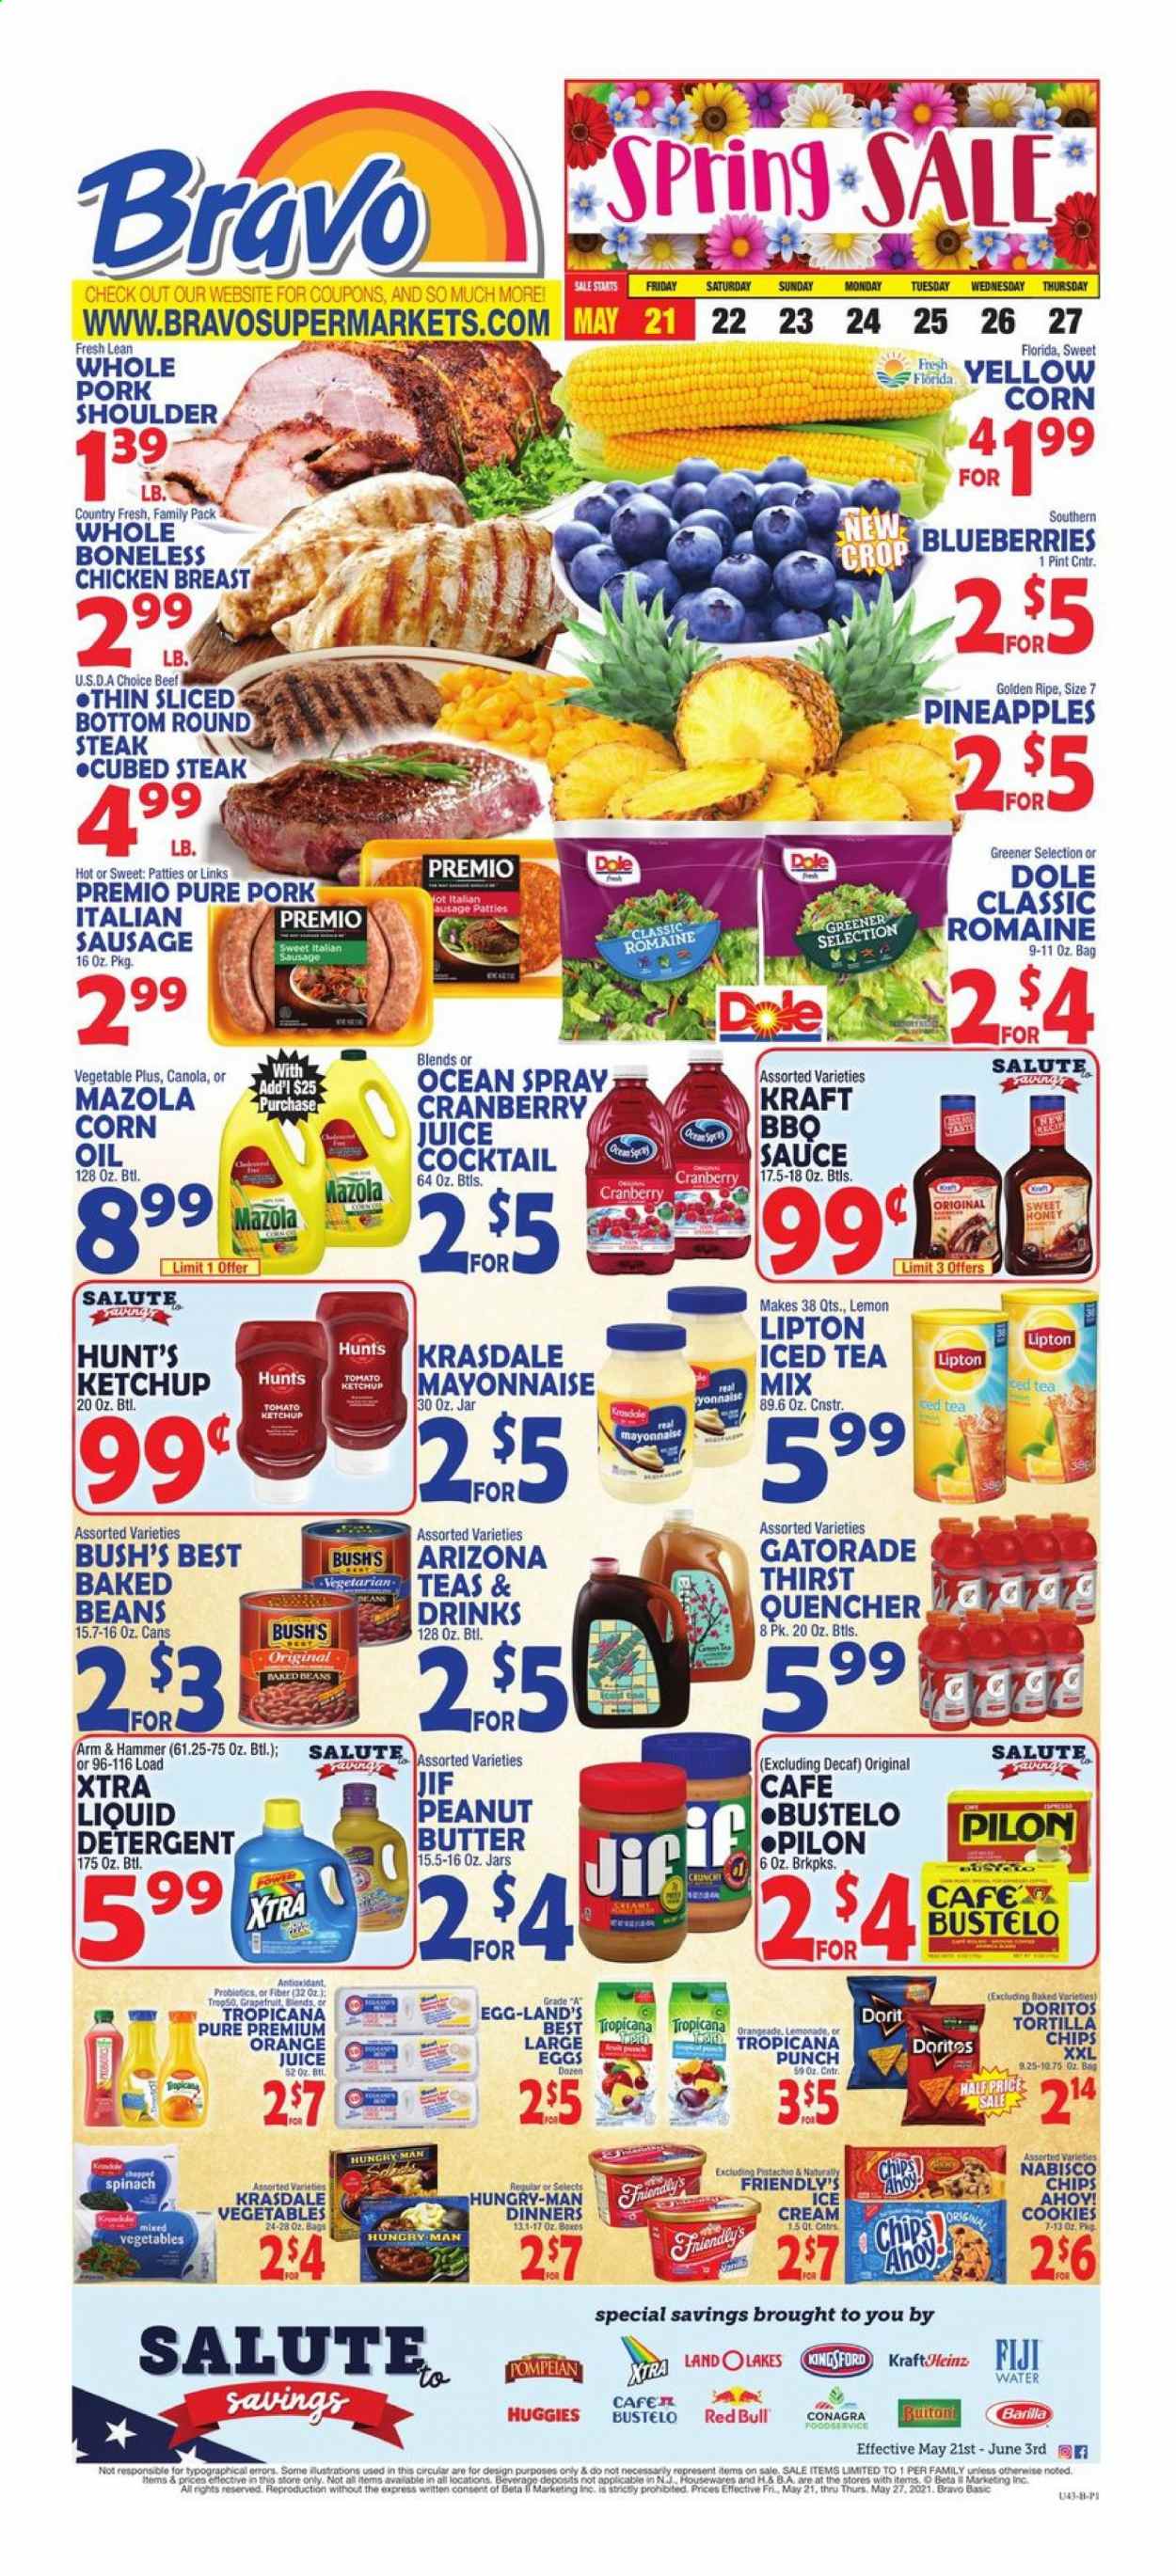 thumbnail - Bravo Supermarkets Flyer - 05/21/2021 - 05/27/2021 - Sales products - beans, spinach, Dole, blueberries, grapefruits, pineapple, sauce, Barilla, Kraft®, Buitoni, sausage, italian sausage, large eggs, mayonnaise, ice cream, Friendly's Ice Cream, mixed vegetables, cookies, Chips Ahoy!, Doritos, tortilla chips, chips, ARM & HAMMER, baked beans, BBQ sauce, ketchup, corn oil, peanut butter, Jif, cranberry juice, lemonade, orange juice, juice, Lipton, ice tea, Red Bull, AriZona, Gatorade, punch, chicken breasts, beef meat, steak, round steak, pork meat, pork shoulder. Page 1.